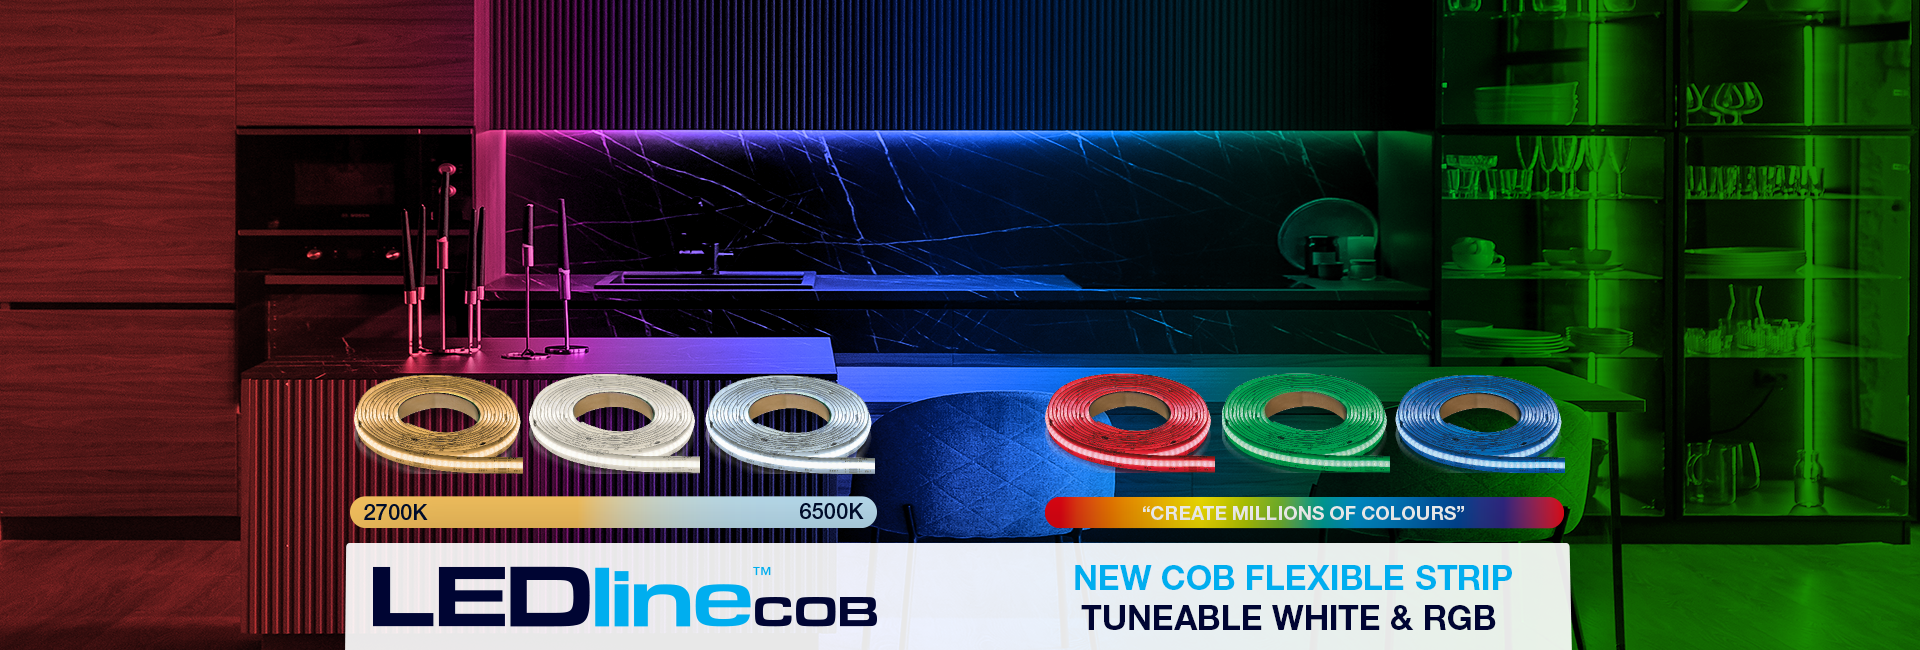 Show products in category What can tuneable white and RGB lighting products bring to your lighting installation?